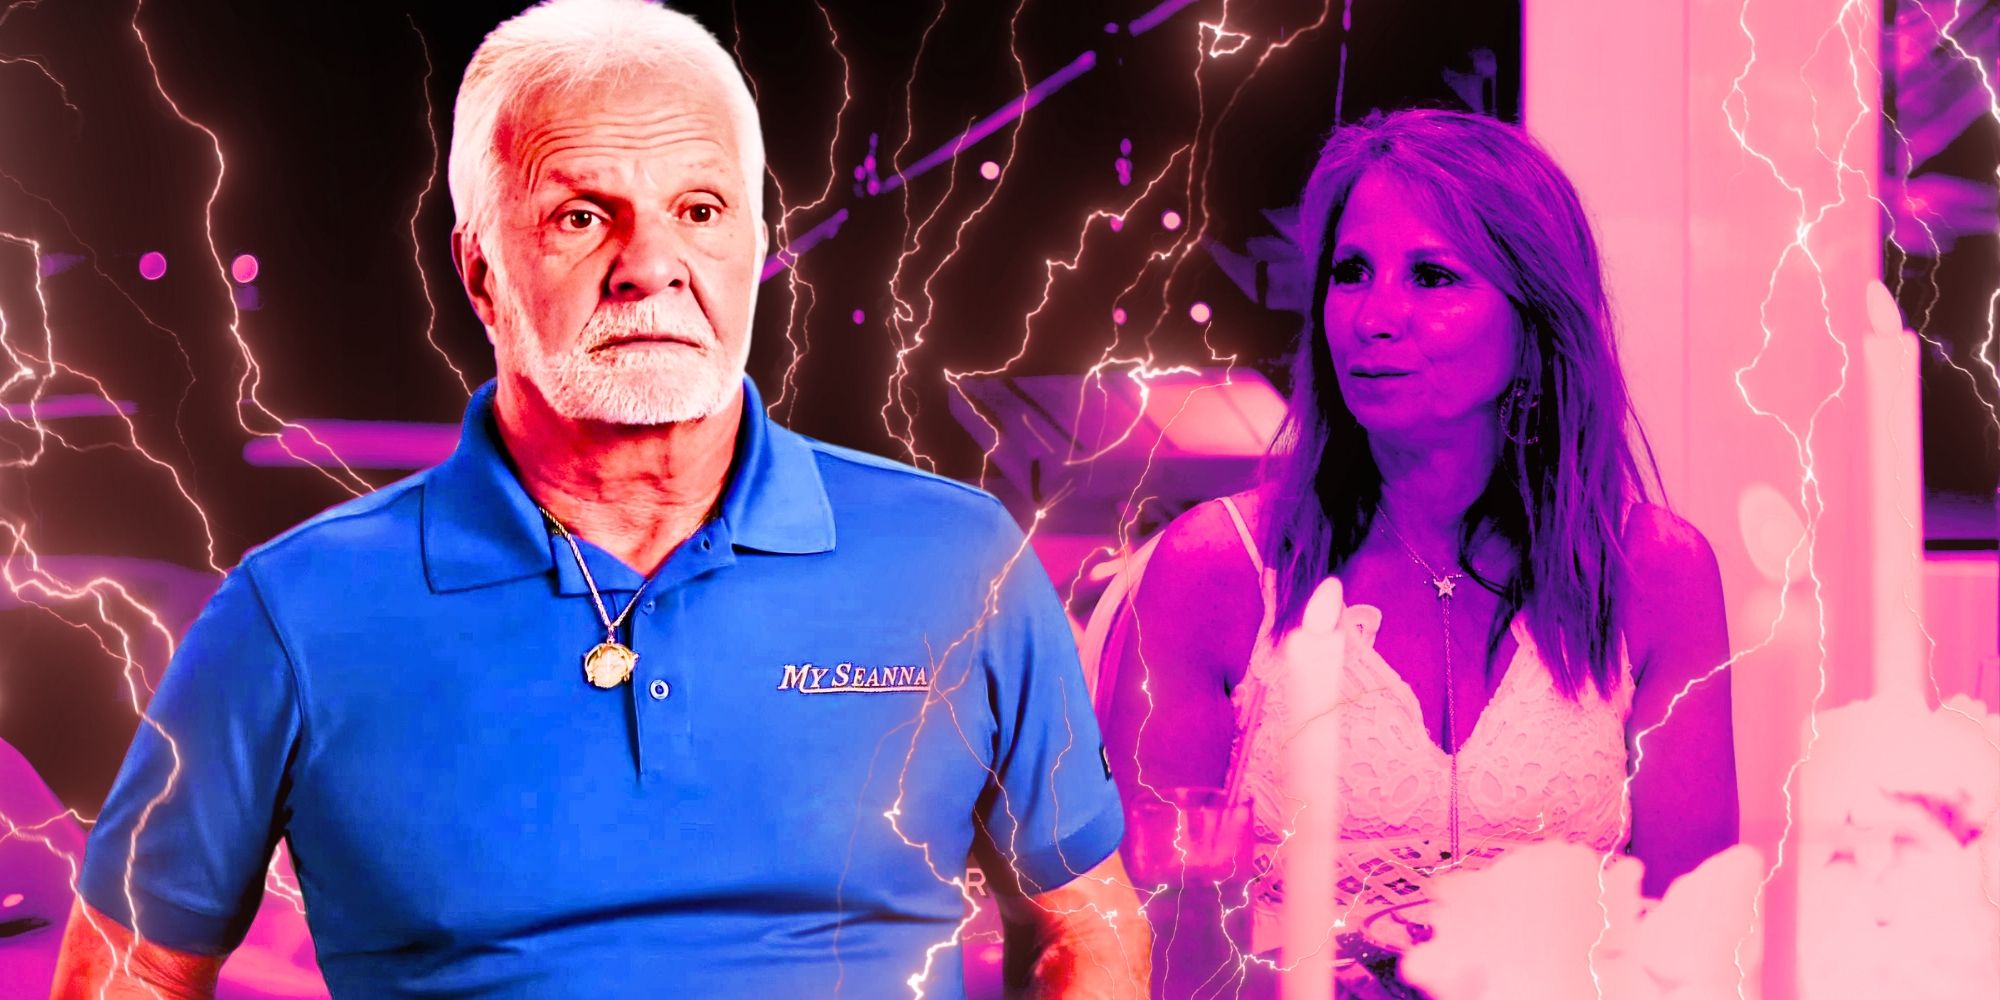 Below Deck's Captain Lee & Jill Zarin looking serious, surrounded by lightning